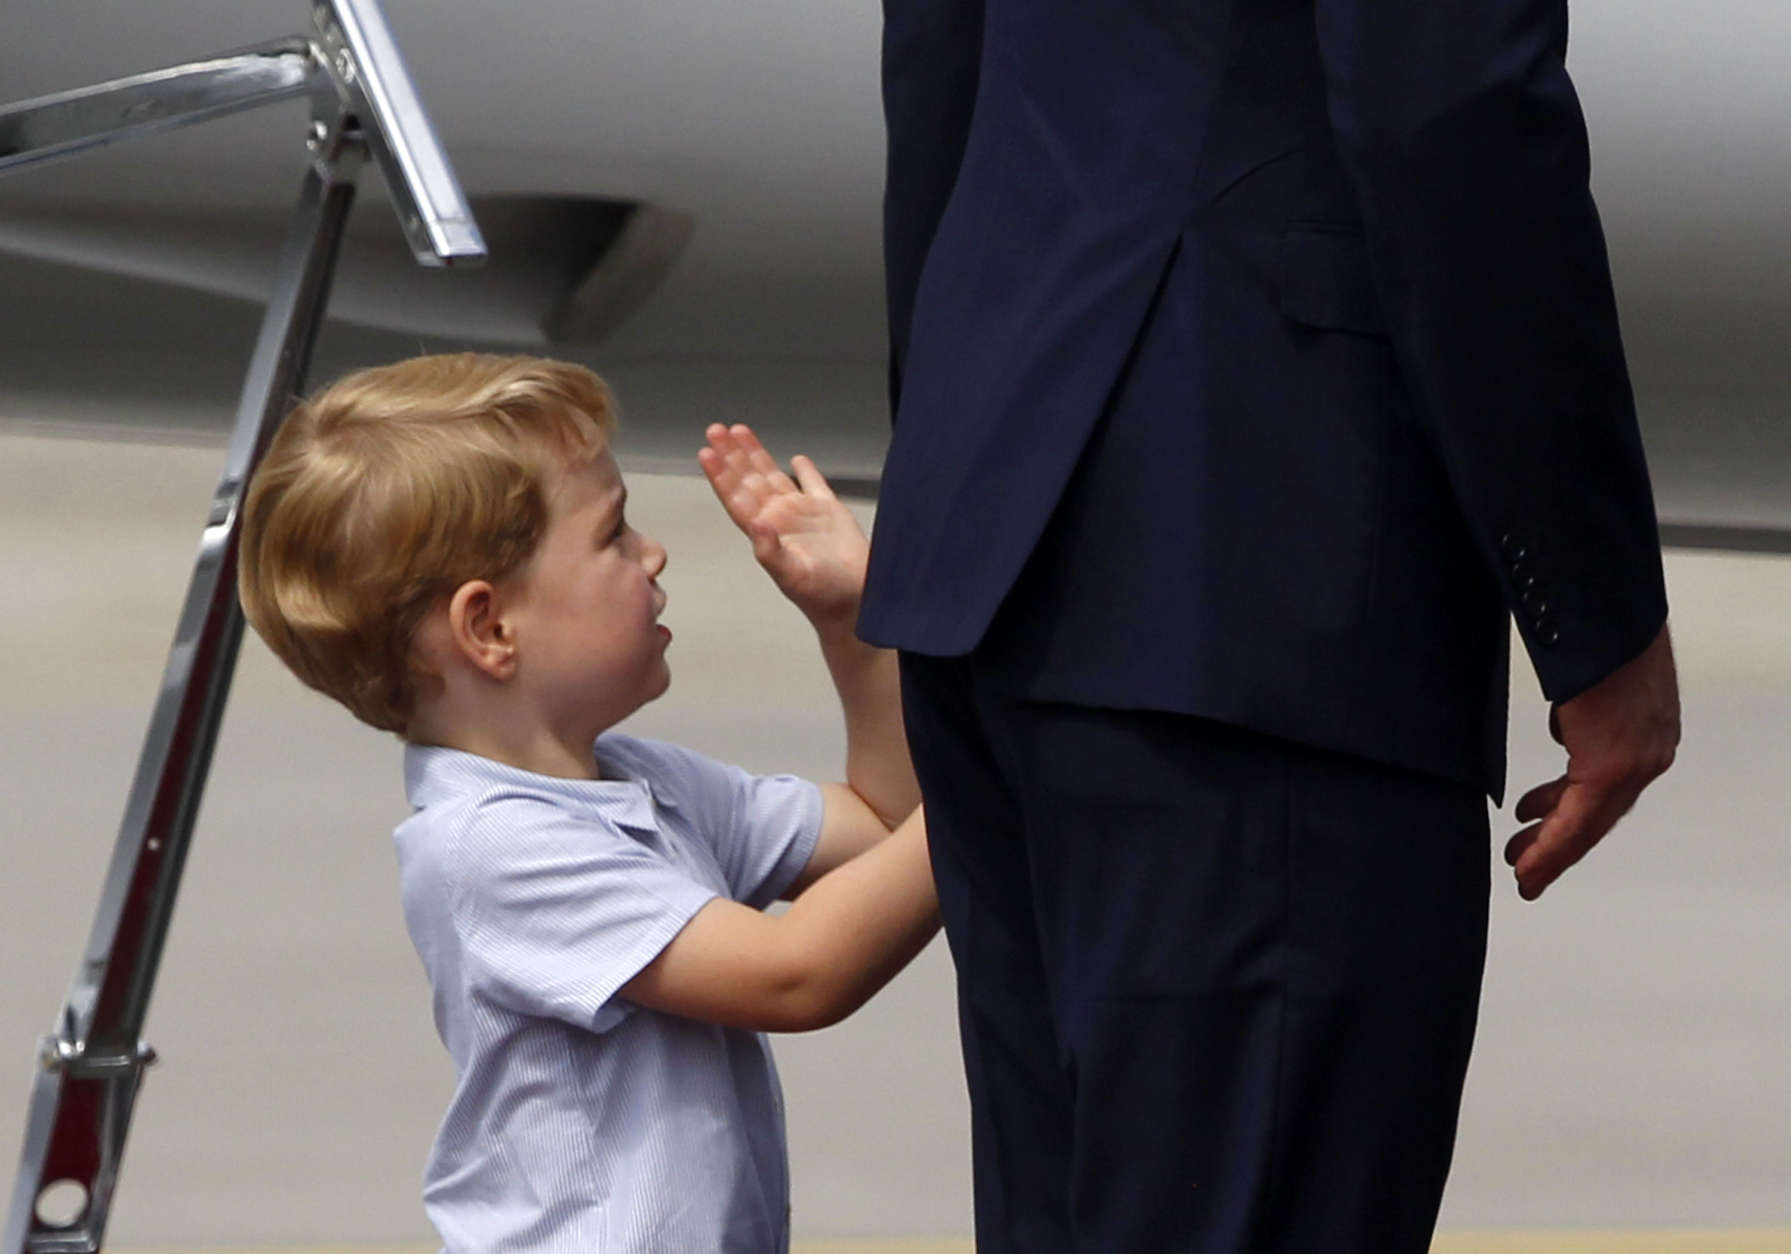 Britain's Prince William, right, holds the hand of his son Prince George as they leave the airport in Warsaw, Poland, Wednesday, July 19, 2017. The British royal couple is in Poland with their children on a goodwill visit intended to seal friendly ties after Britain leaves the European Union. (AP Photo/Czarek Sokolowski)